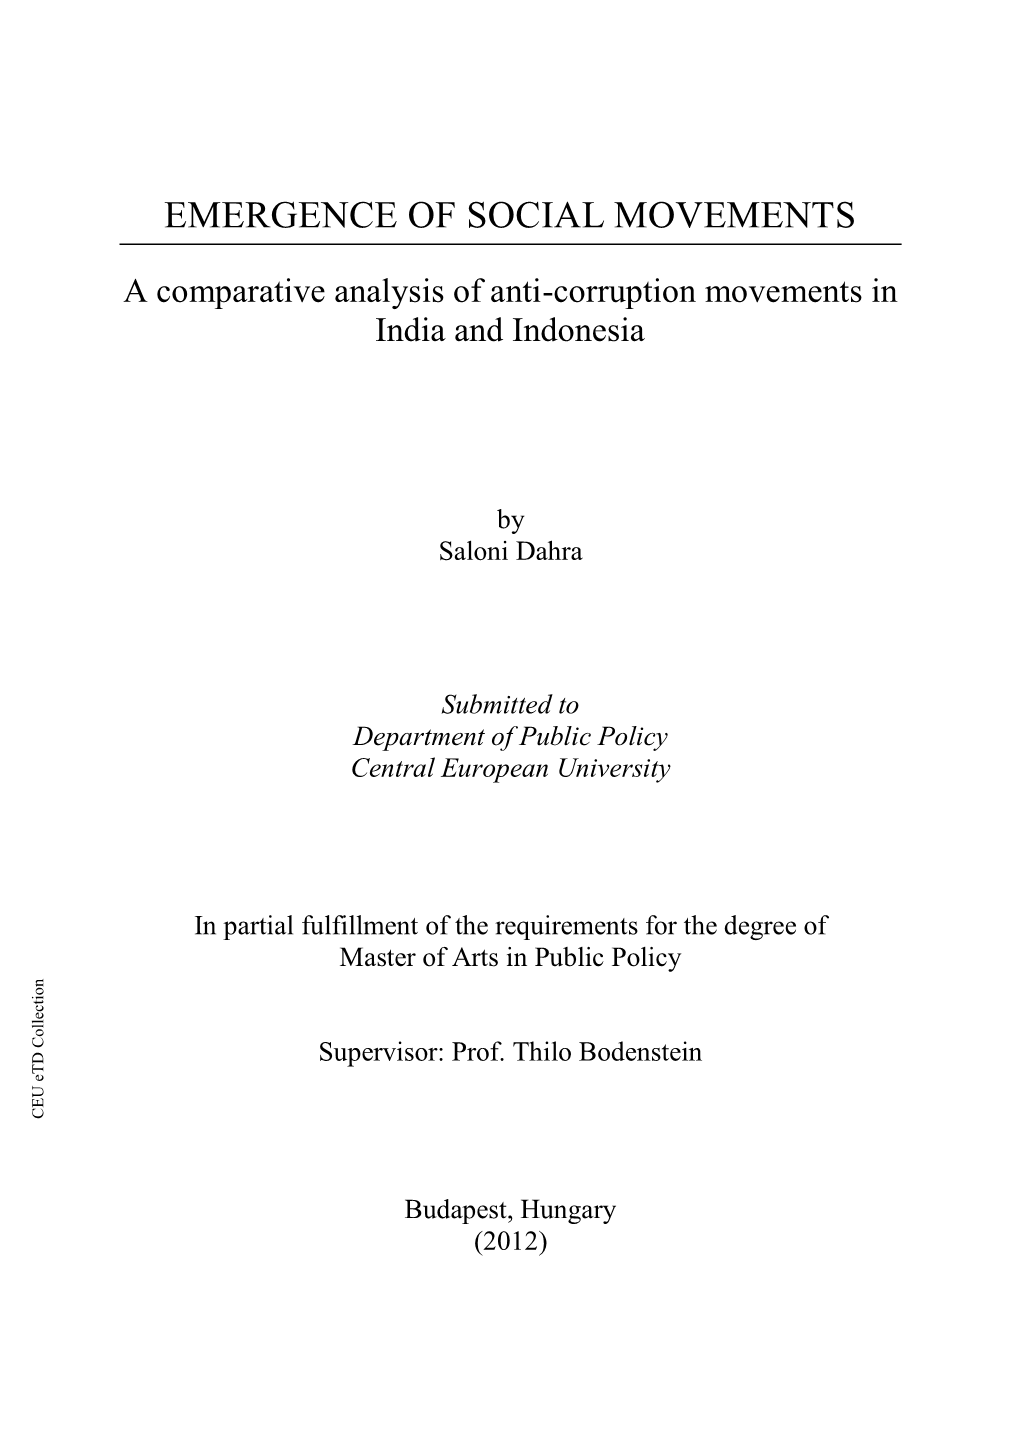 Emergence of Social Movements